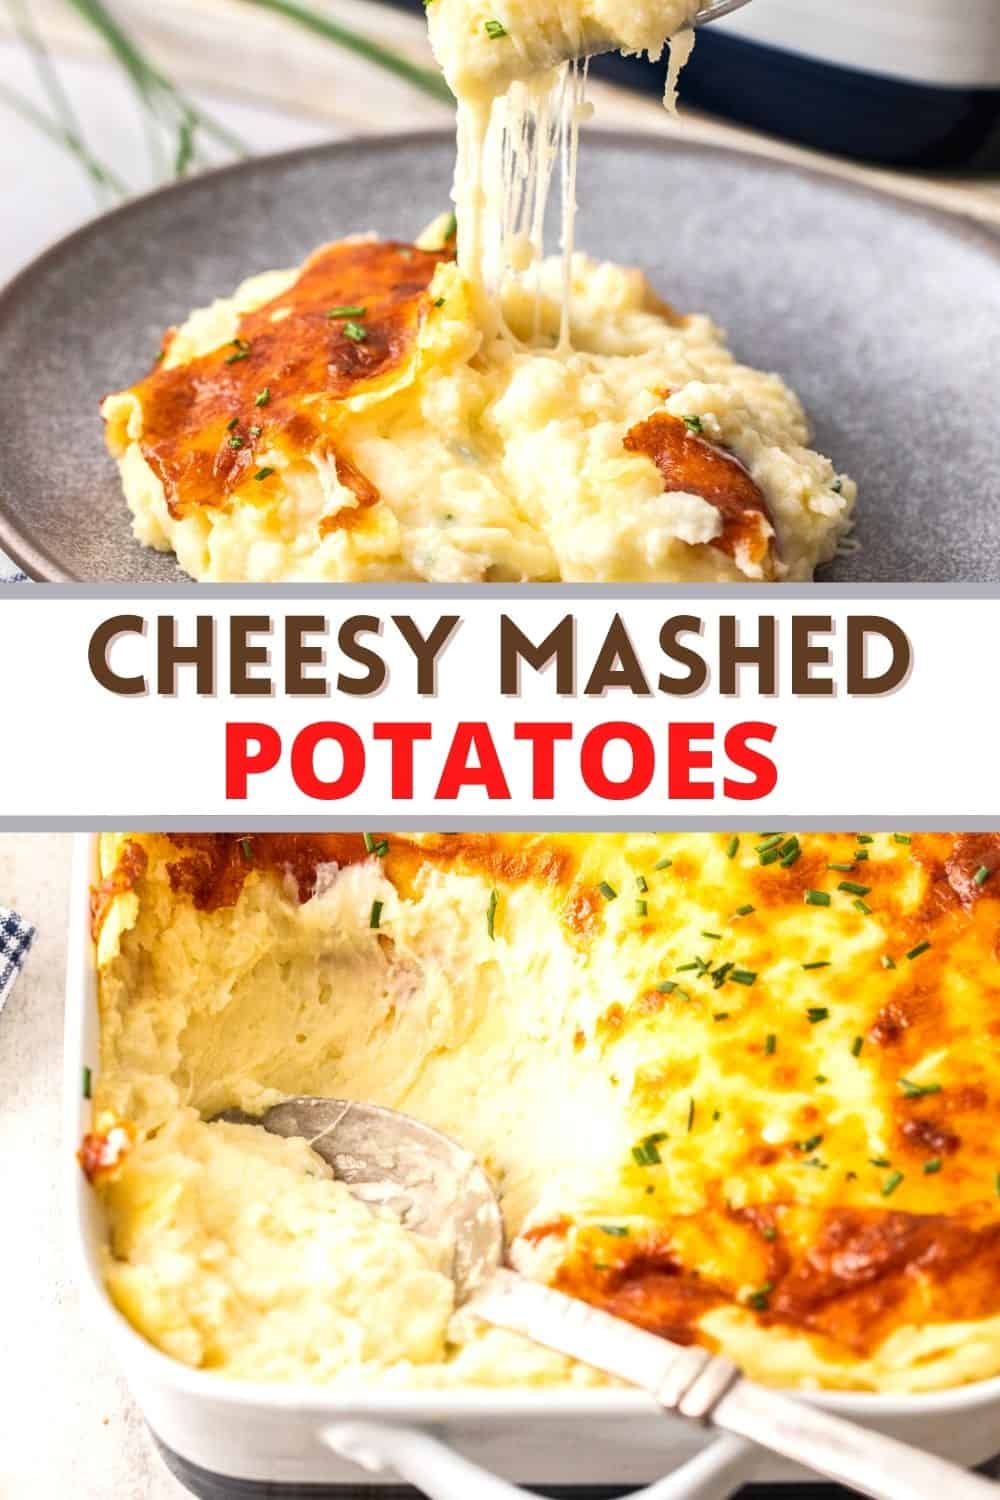 The cheesiest most delicious mashed potatoes. This cheesy mashed potato recipe makes A LOT so be ready to share!